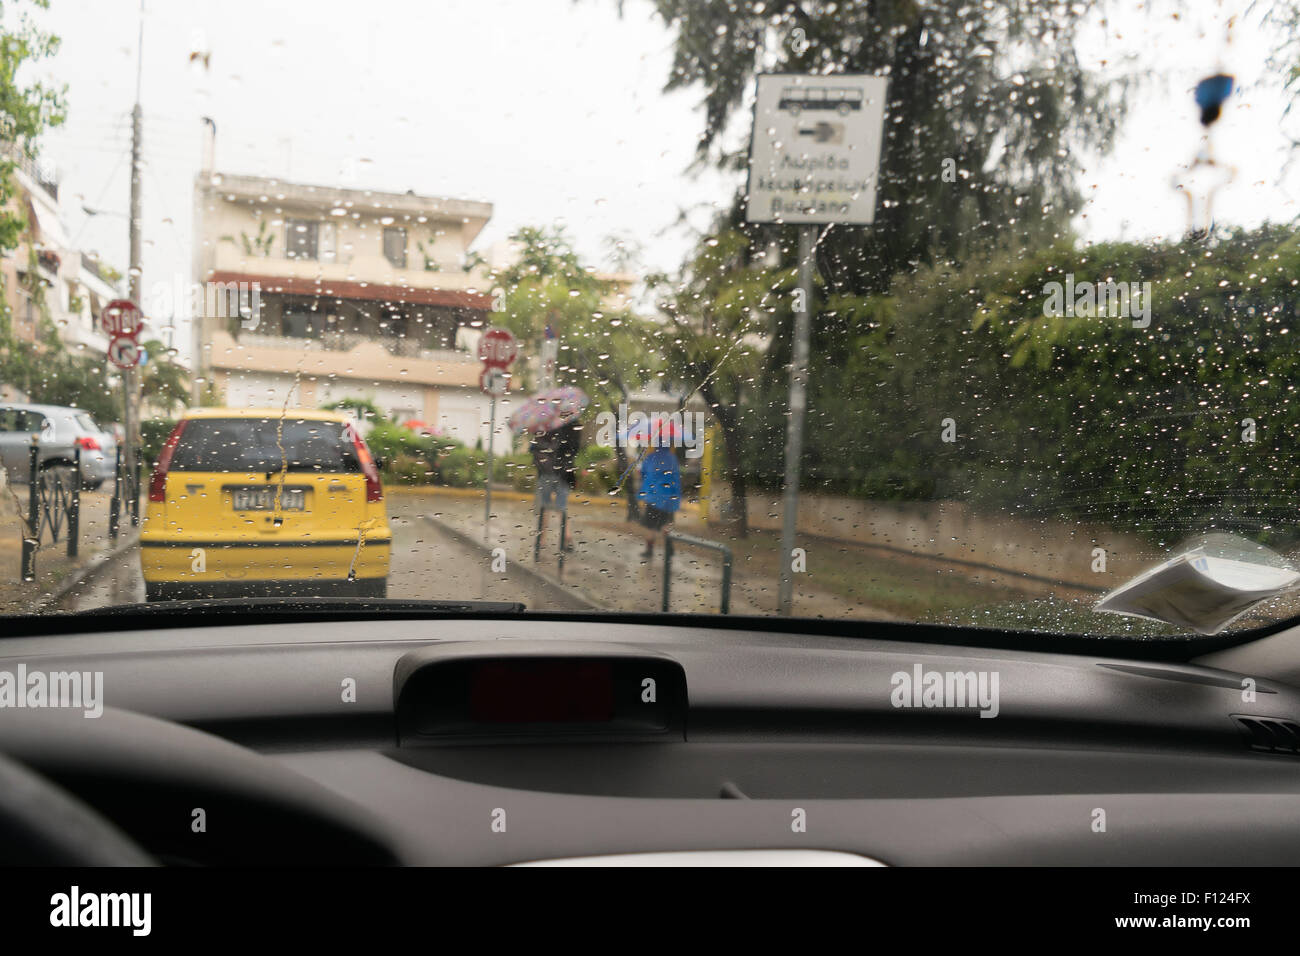 Rainy day. View from the inside of a car. Stock Photo